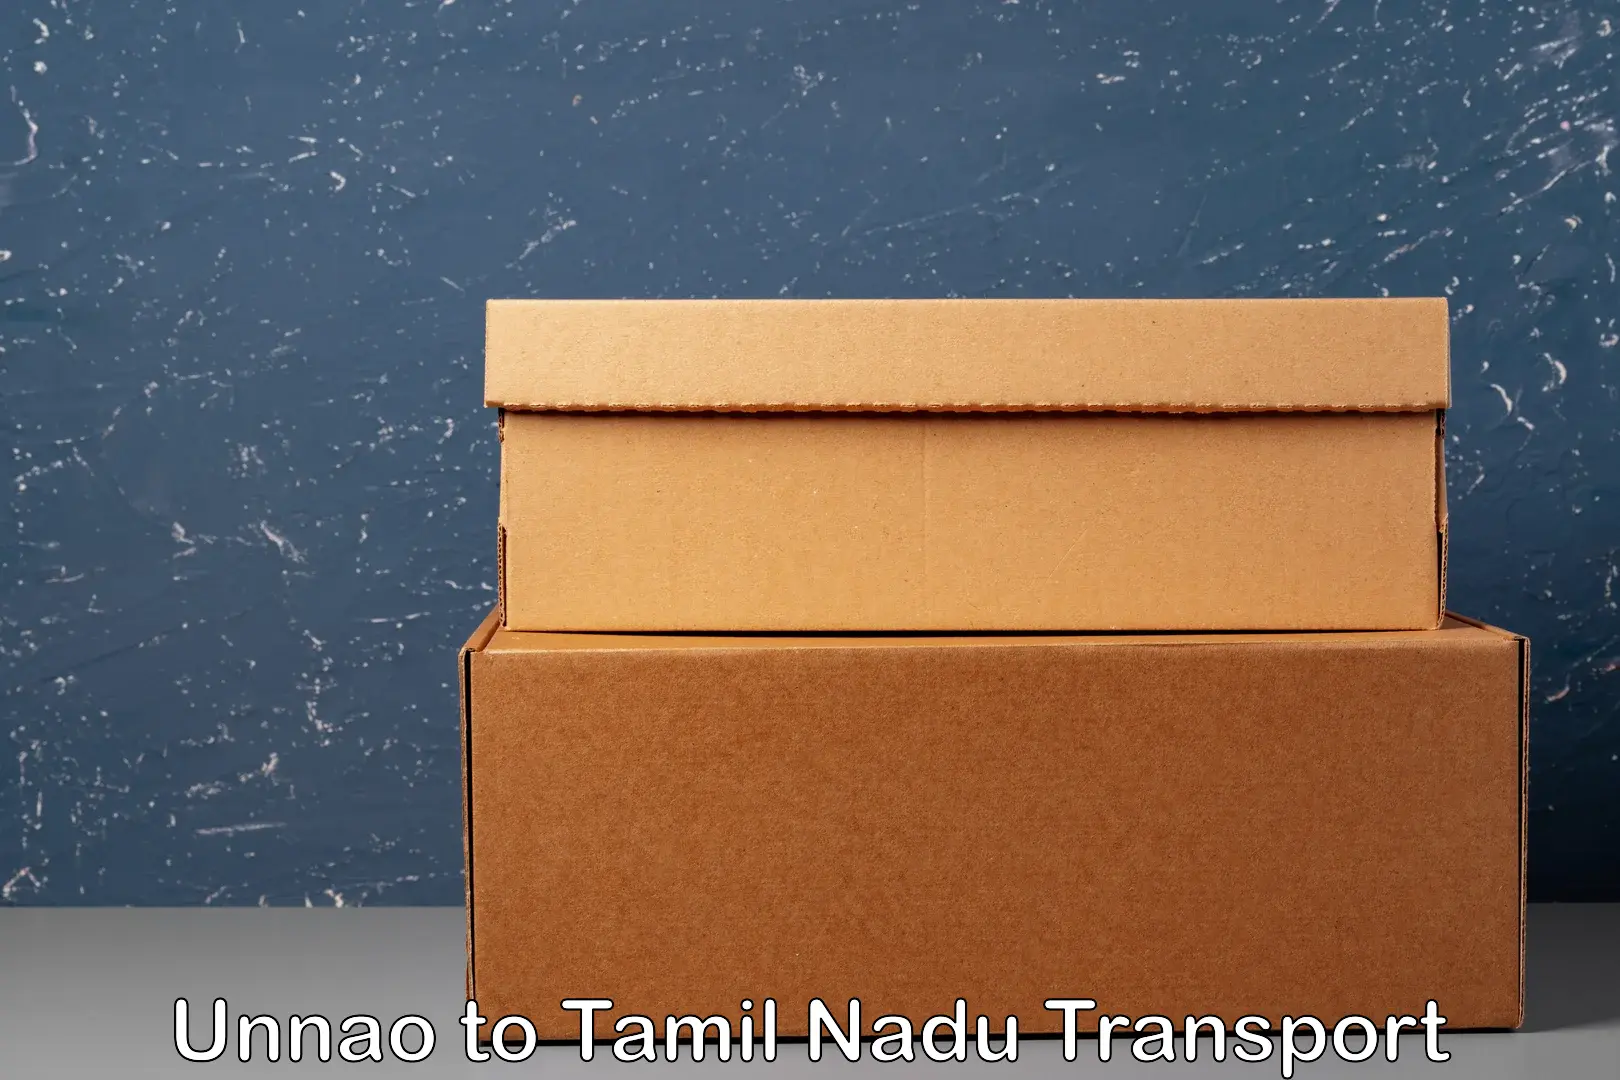 Shipping partner Unnao to Hosur